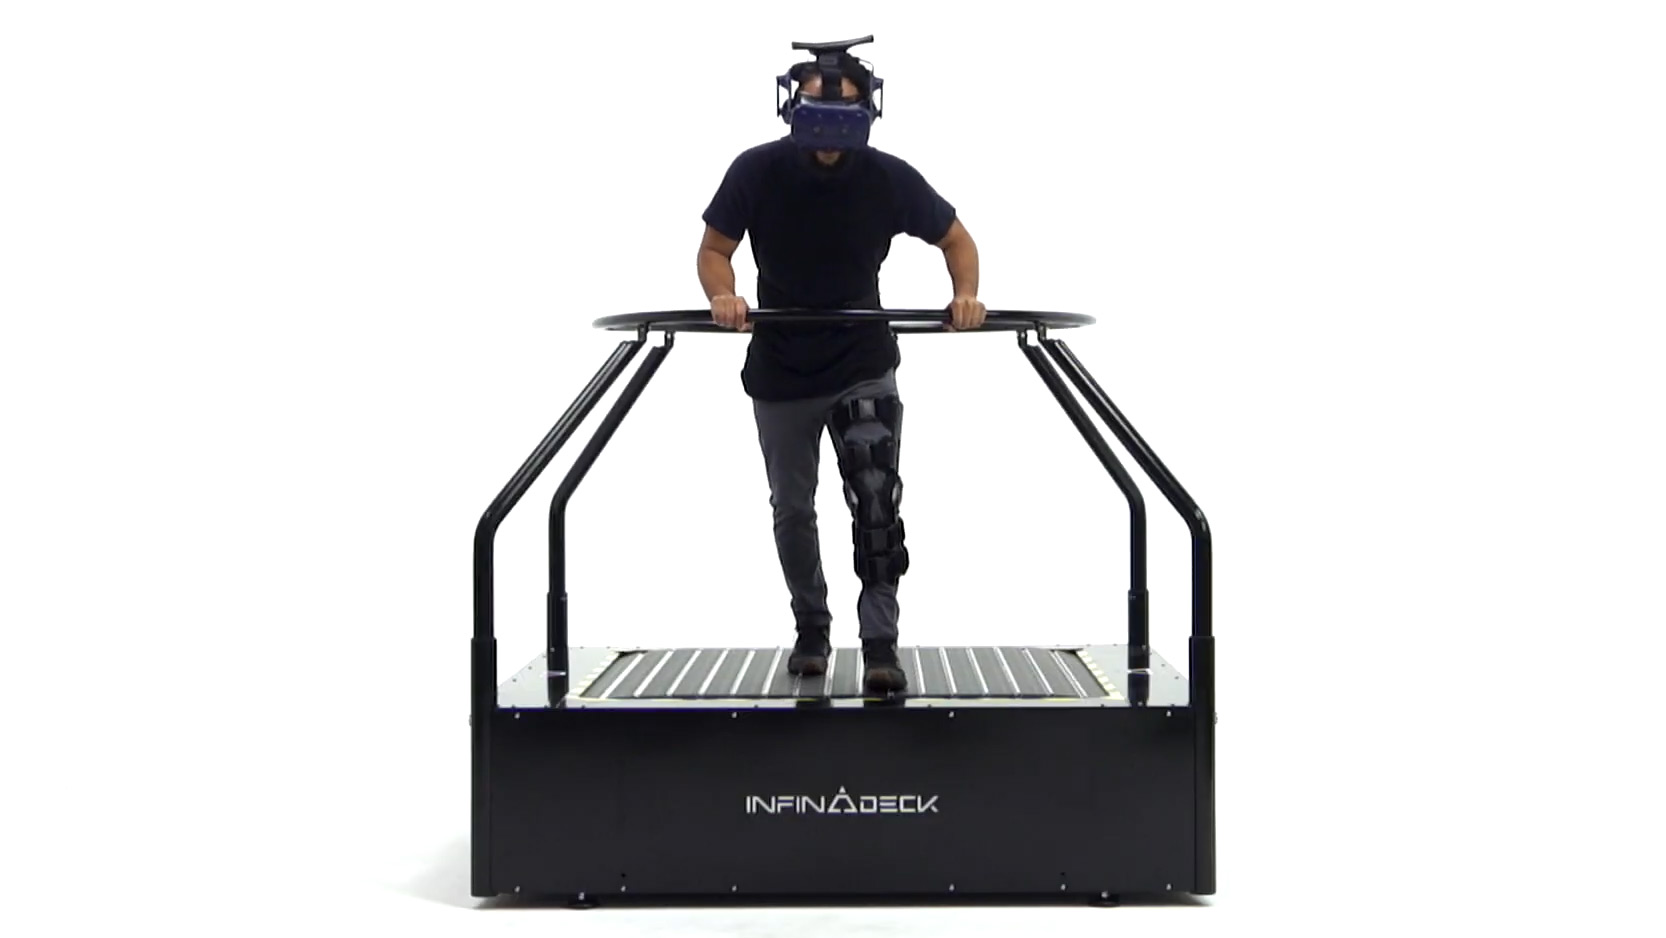 The treadmill from Ready Player One is coming to our homes soon